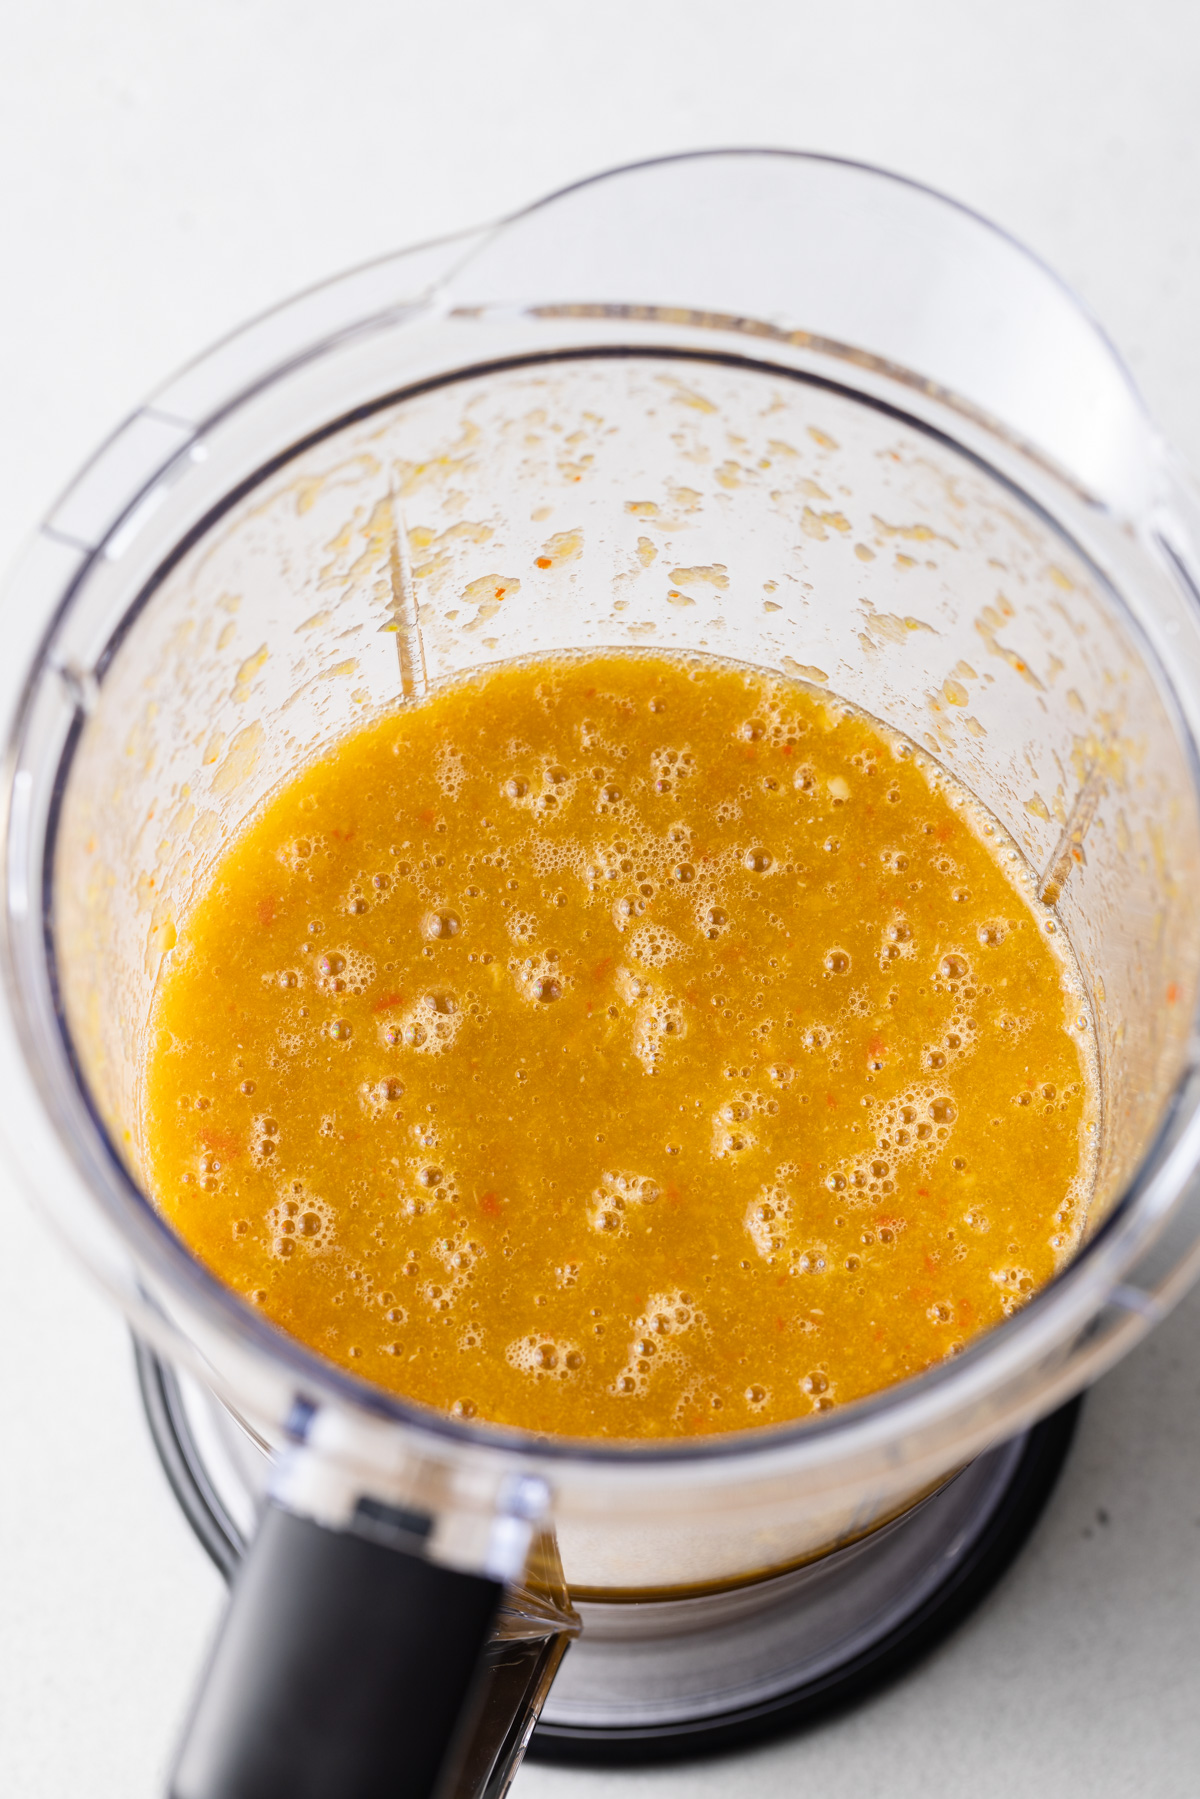 Pureed hot sauce in a food processor.